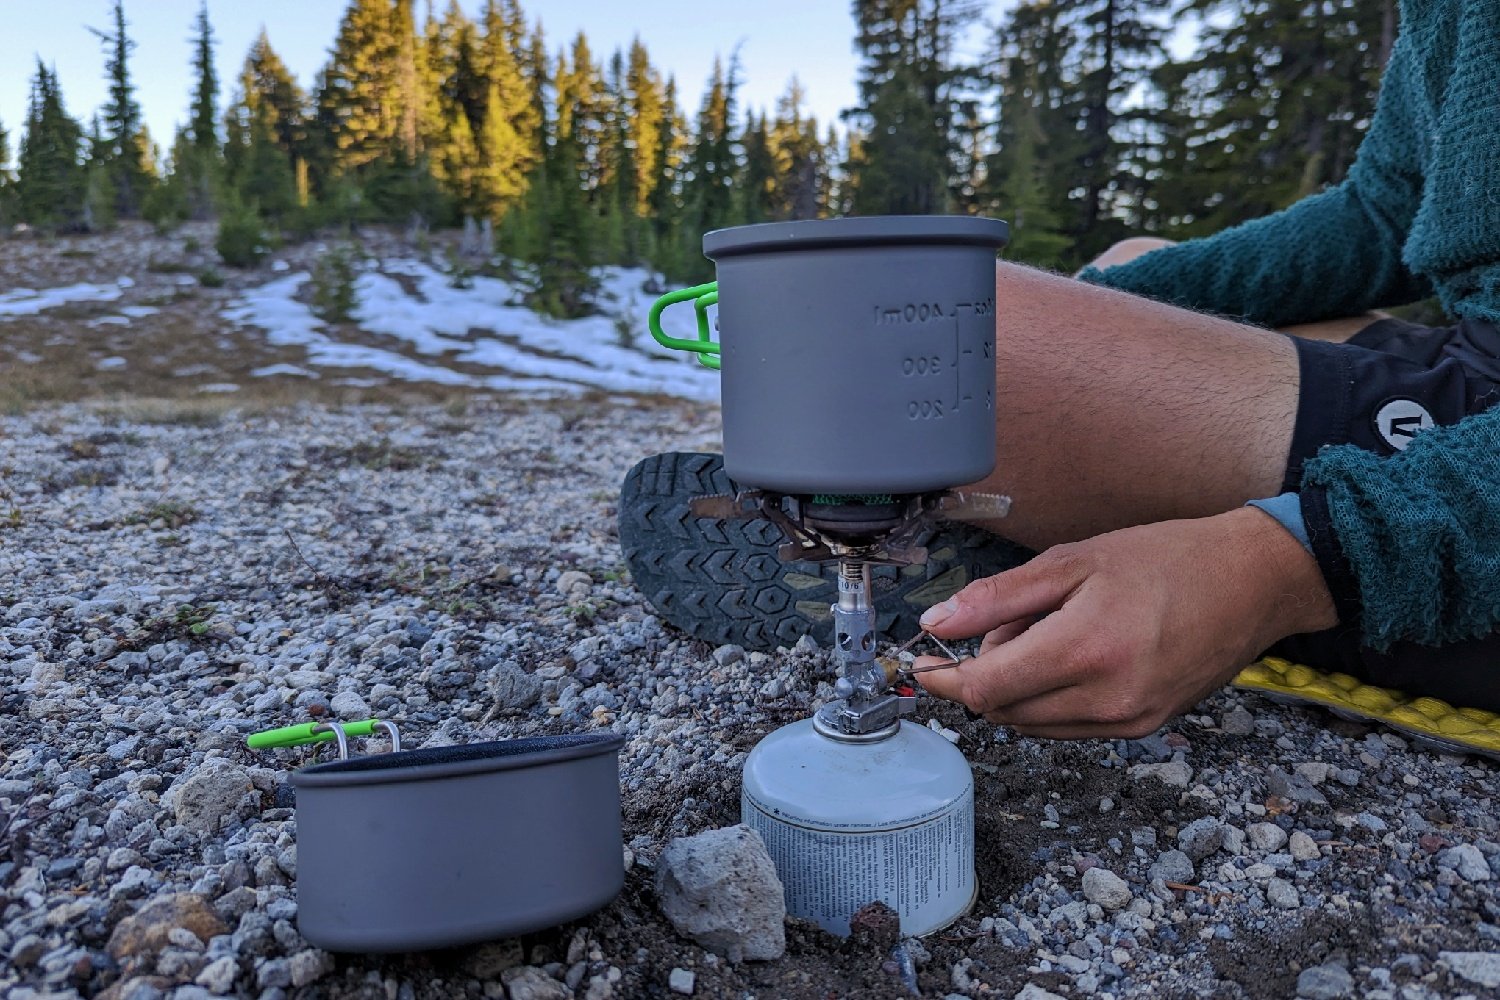 A hiker adjusting the flame on the SOTO Windmaster stove in a rockycampsite with pine trees in the background